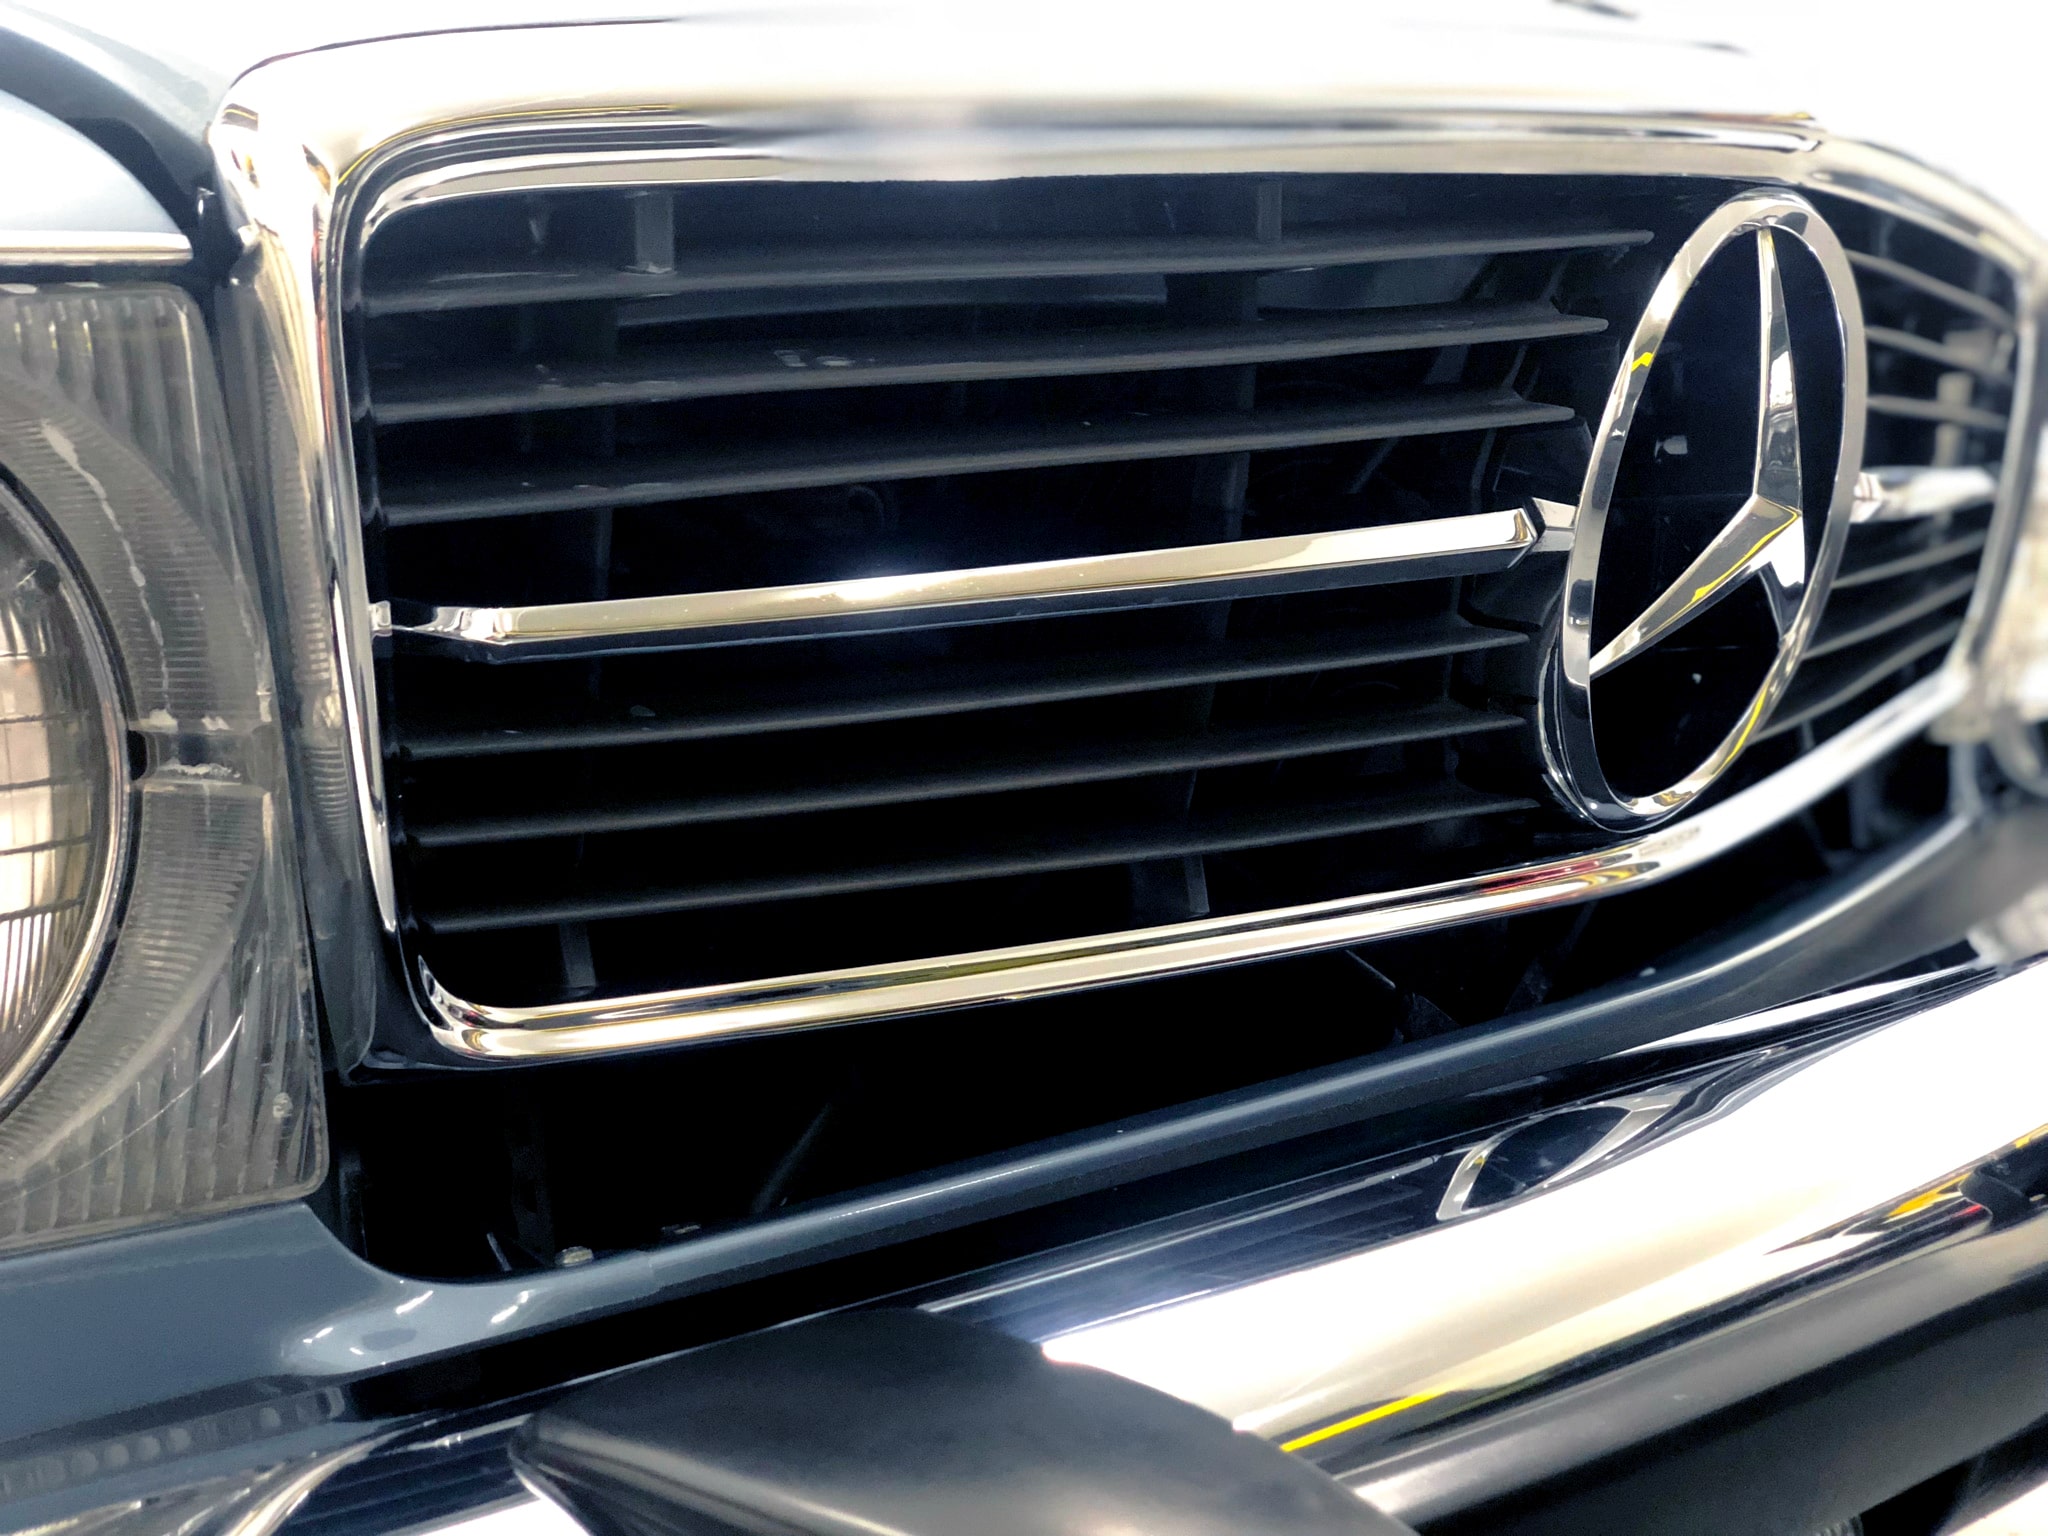 Perfectly clean, sparkly and toned front grille of a classic blue Mercedes after being protected with ClearFX Trim